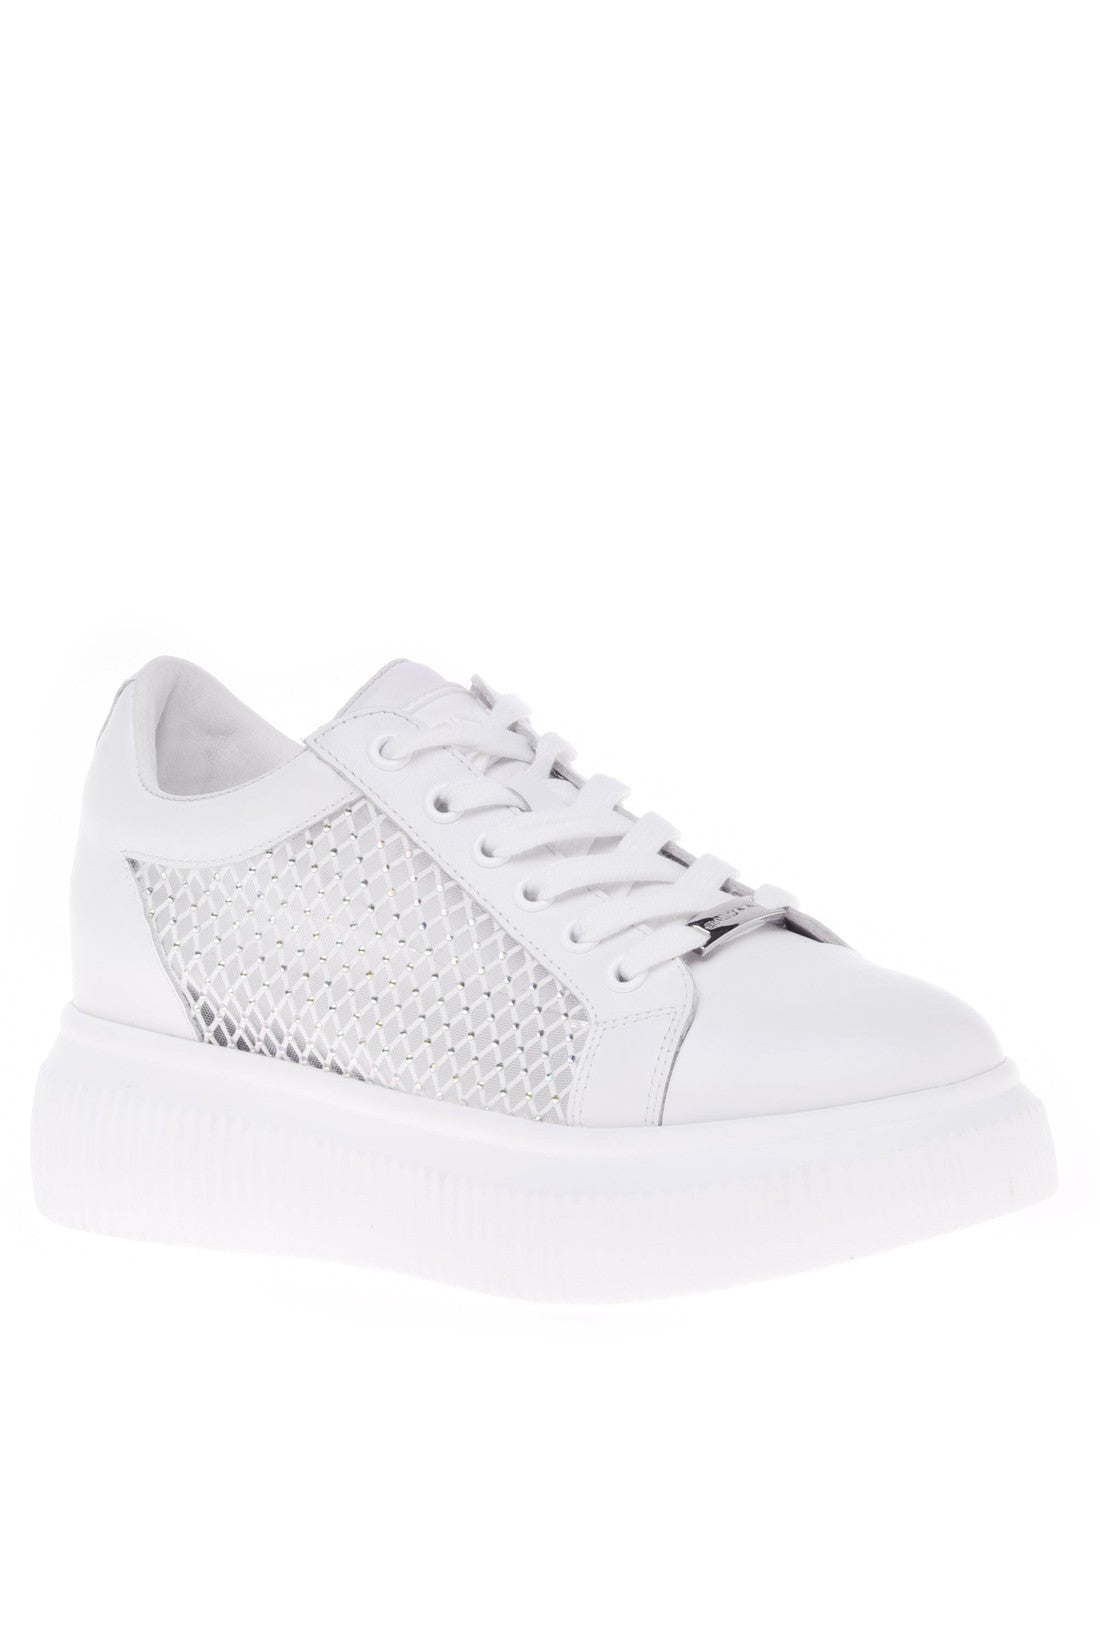 BALDININI-OUTLET-SALE-Sneaker-in-white-calfskin-with-mesh-Sneaker-35-ARCHIVE-COLLECTION.jpg